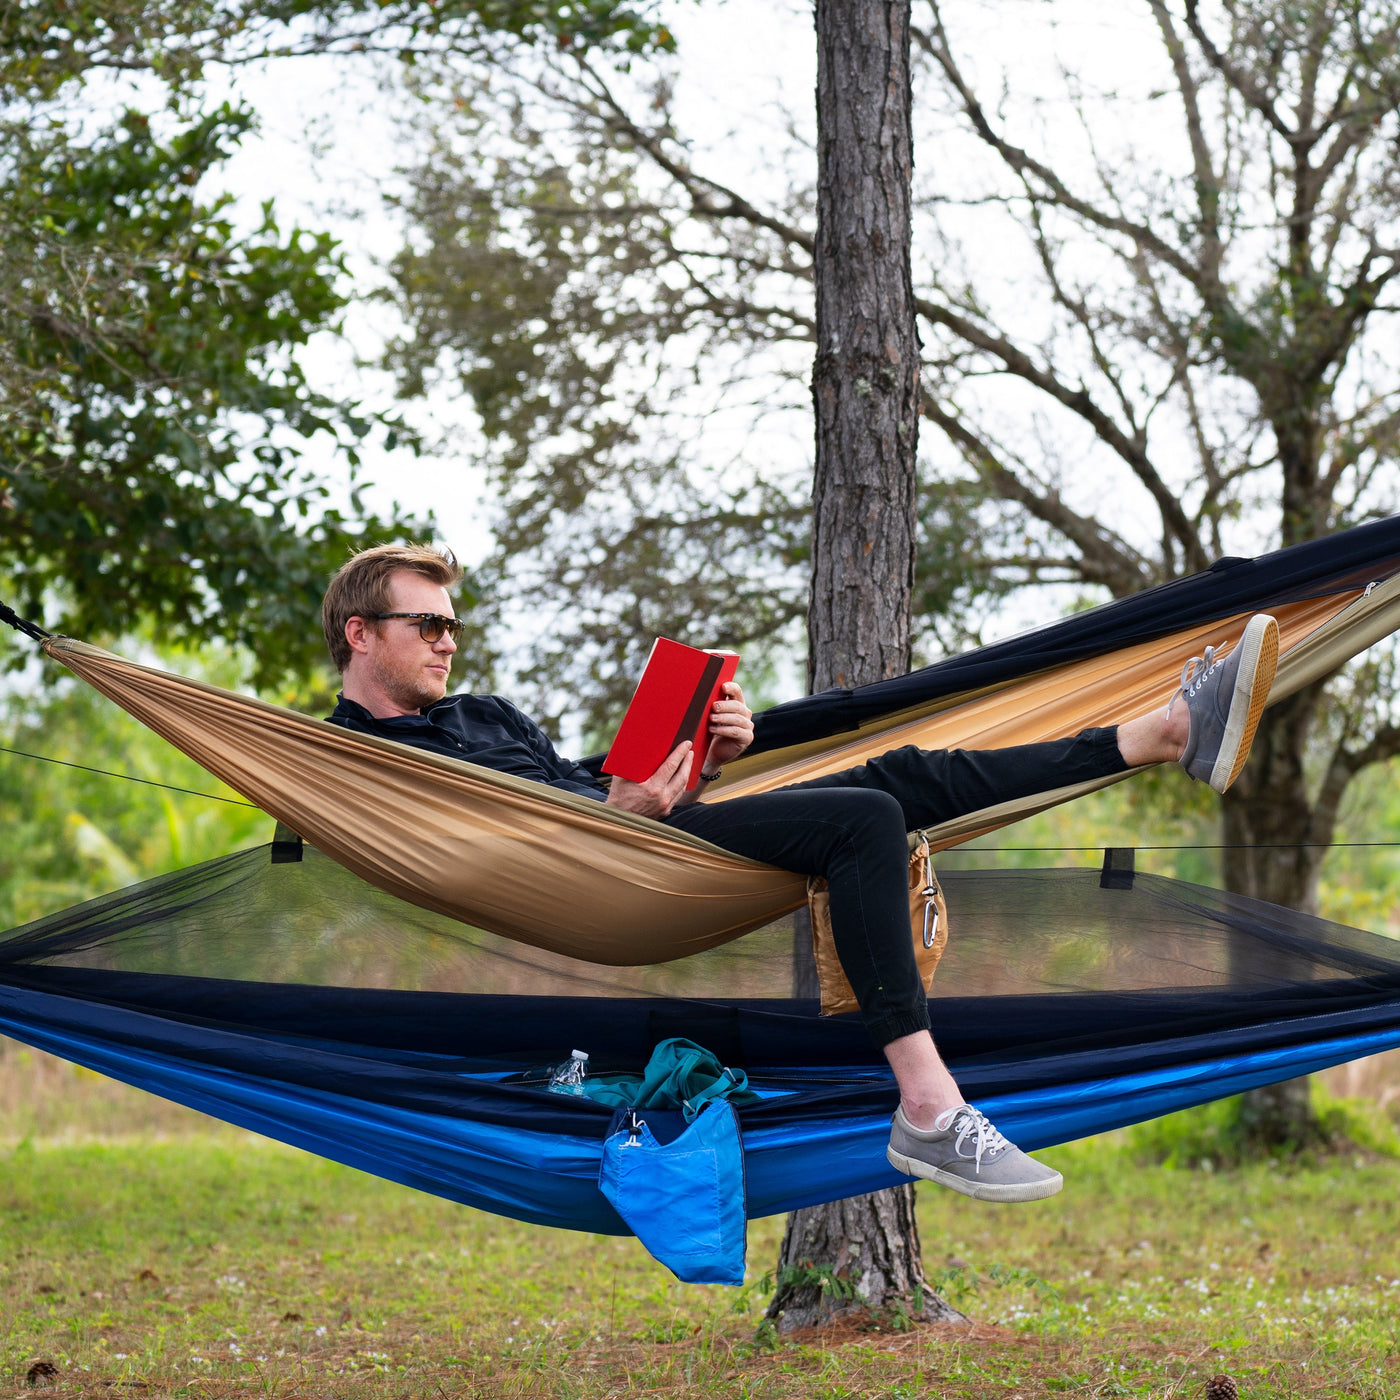 A man reading a book while relaxing in a Bliss Hammock Camping Hammock strapped between two trees. Another camping hammock is set up underneath him - Camping Hammocks